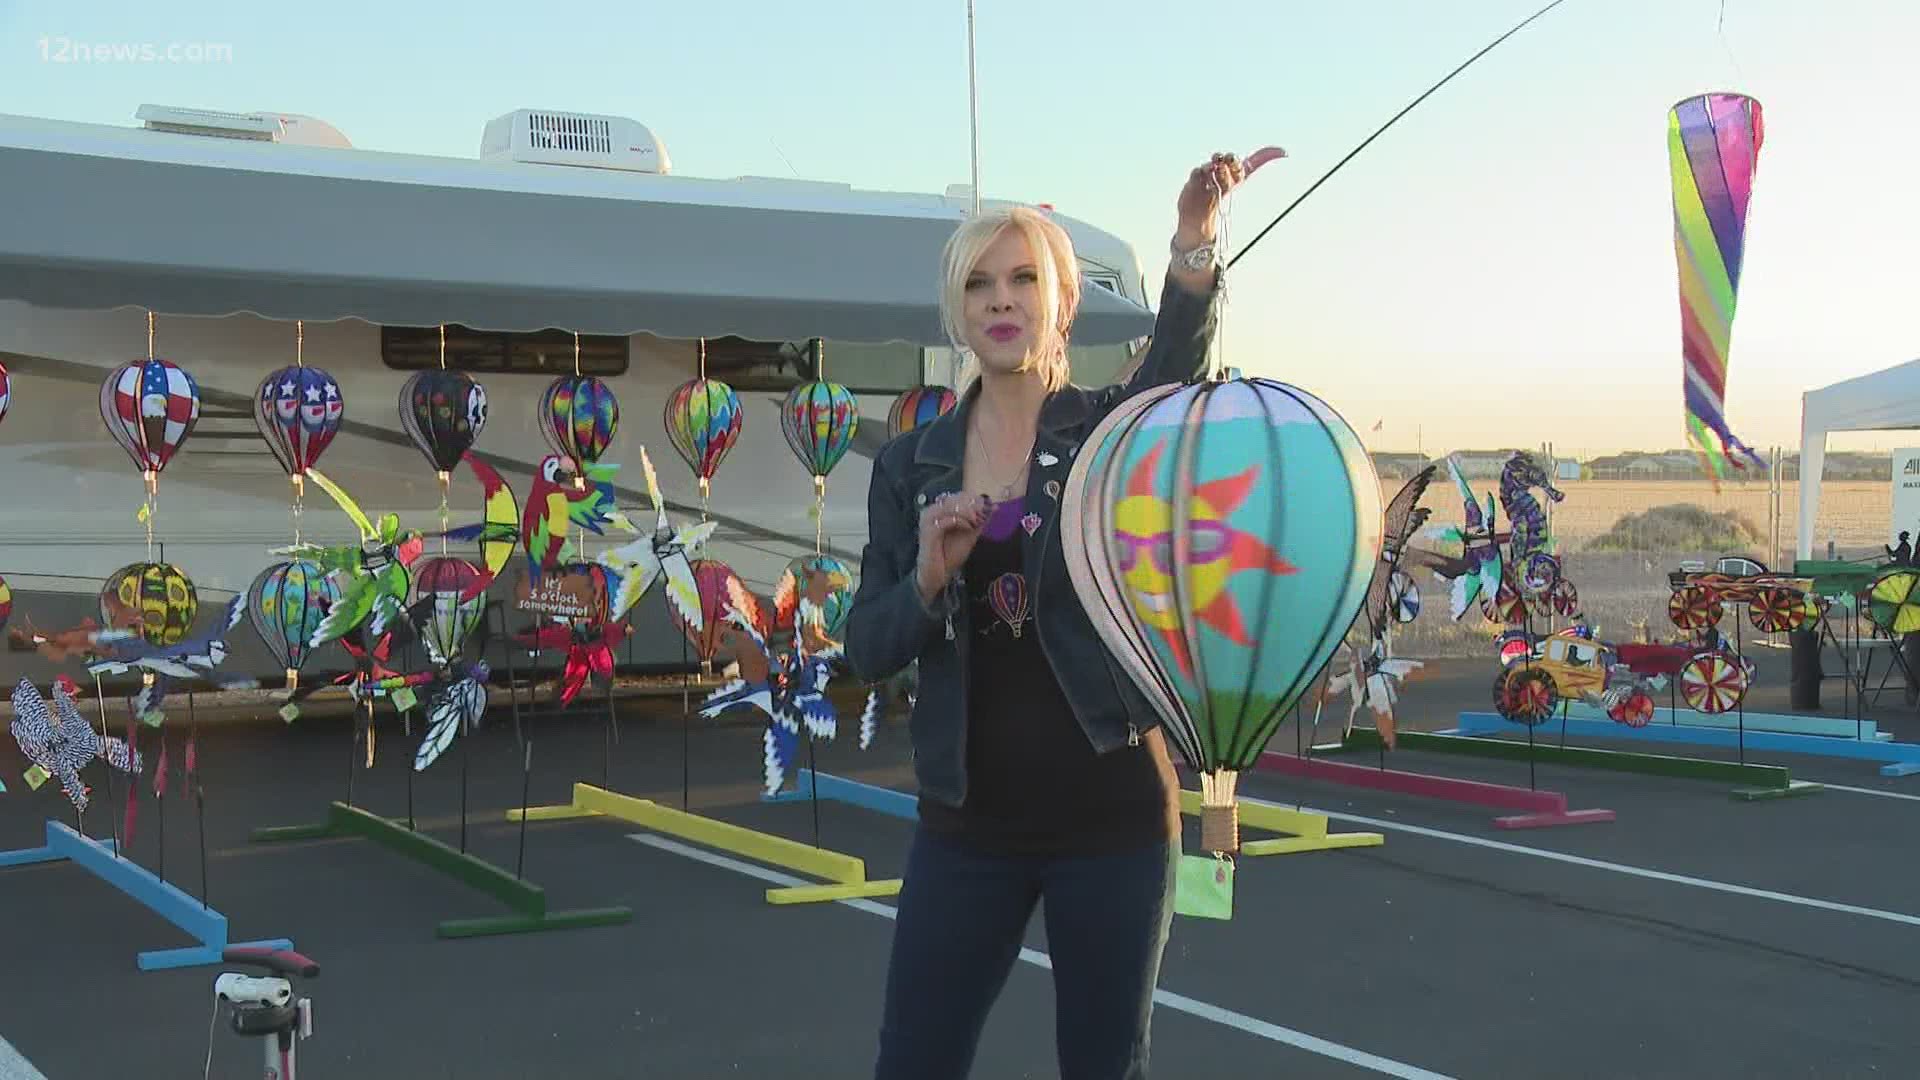 Candy canons, paper rocket making, parachute racing and kites as large as semi-trucks? It's all part of the new Desert Winds Kite Festival at Goodyear's event.